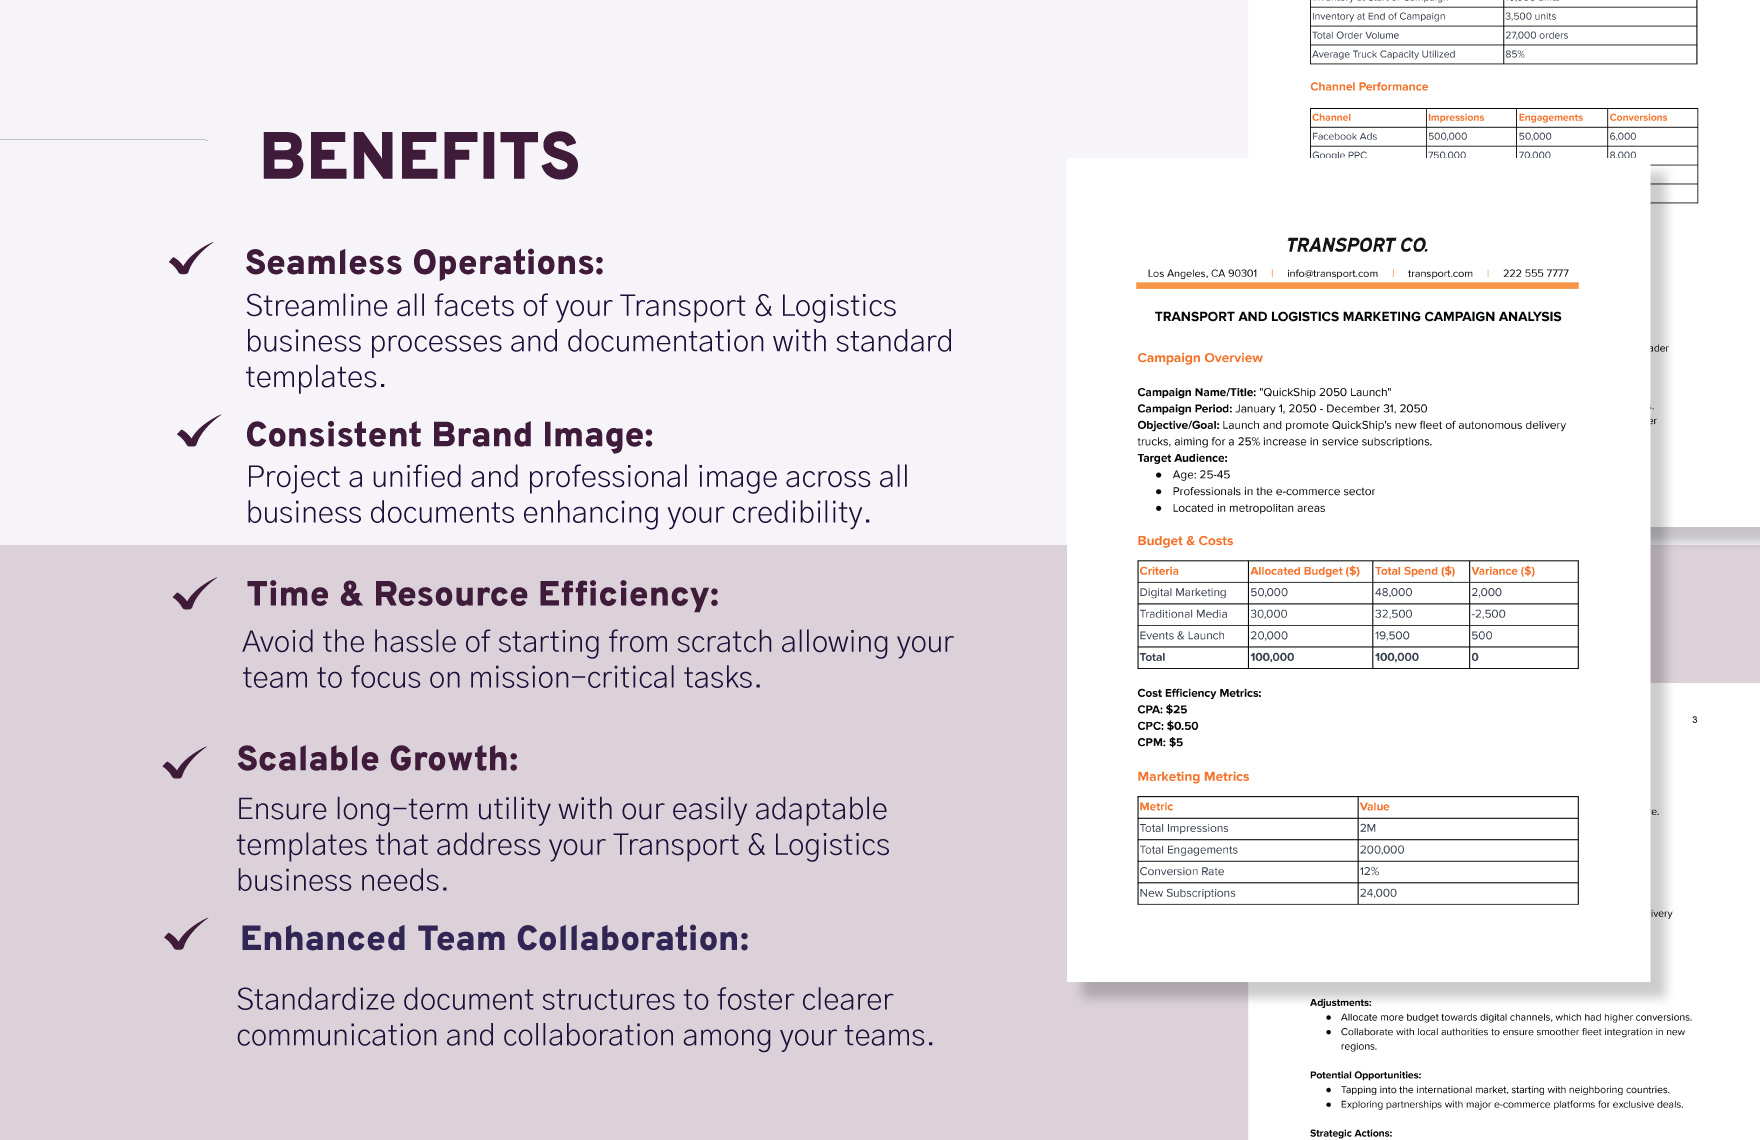 Transport and Logistics Marketing Campaign Analysis Template